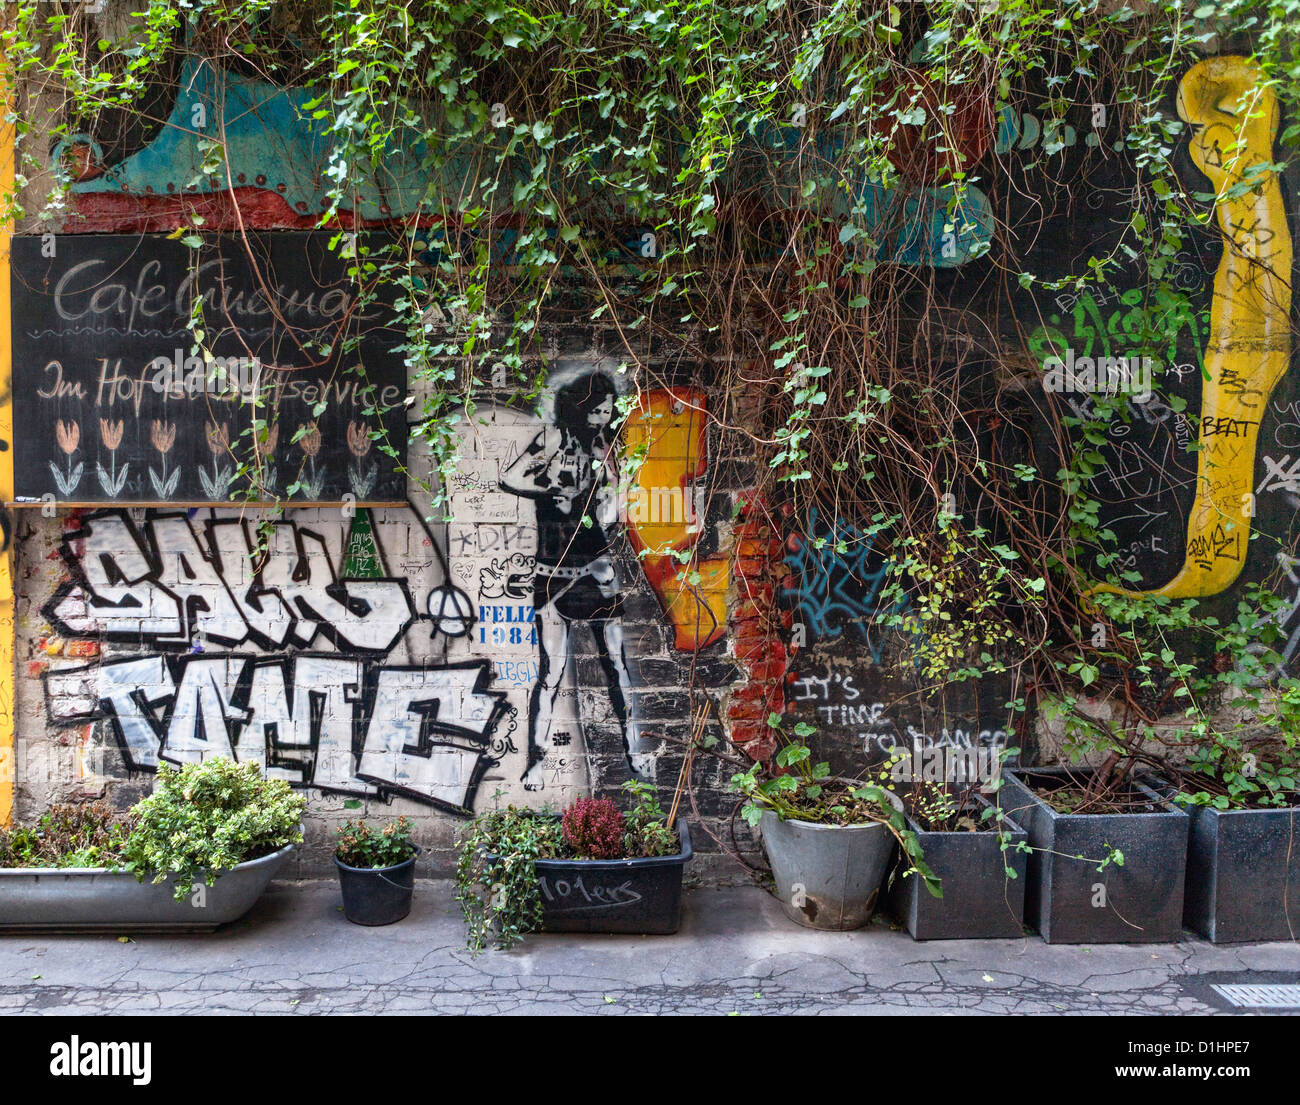 Wall with Graffiti, street art and plants outside the Cafe Cinema - Haus Schwarzenberg at 39 Rosenthalerstrasse, Mitte, Berlin Stock Photo